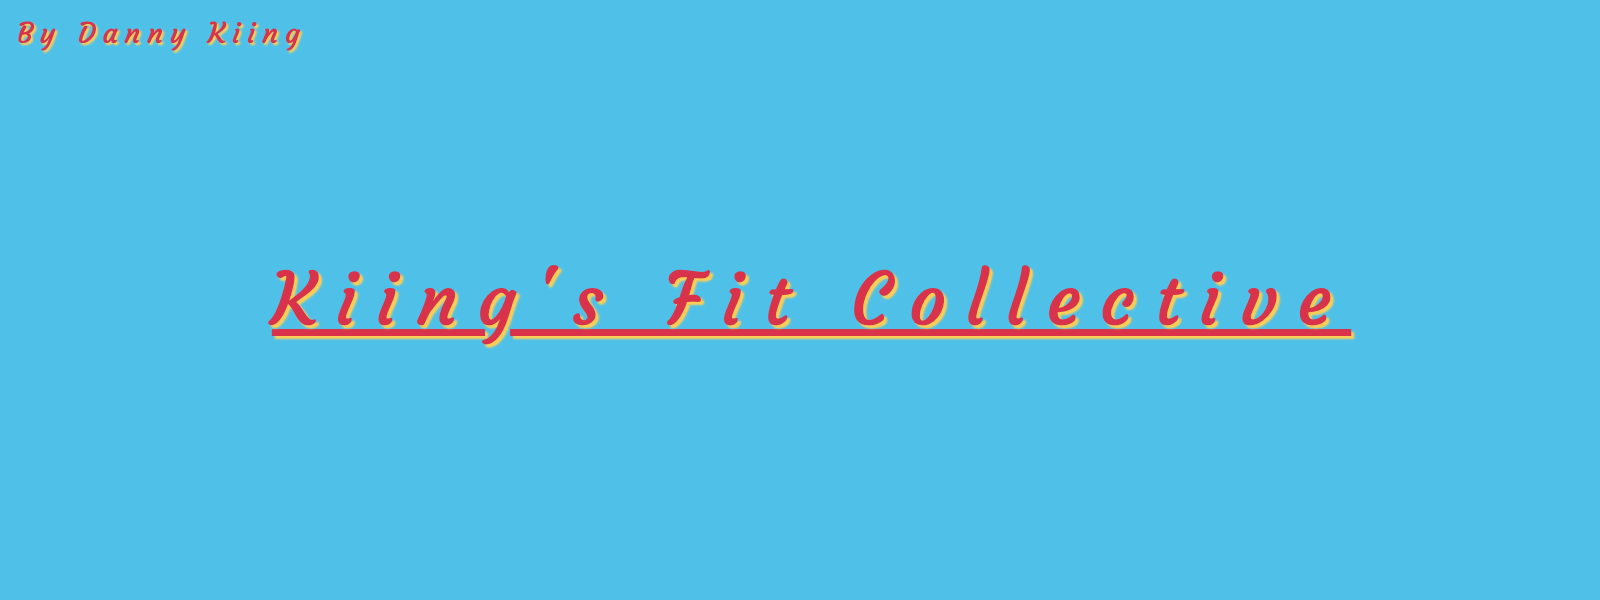 Kiing's Fit Collective 